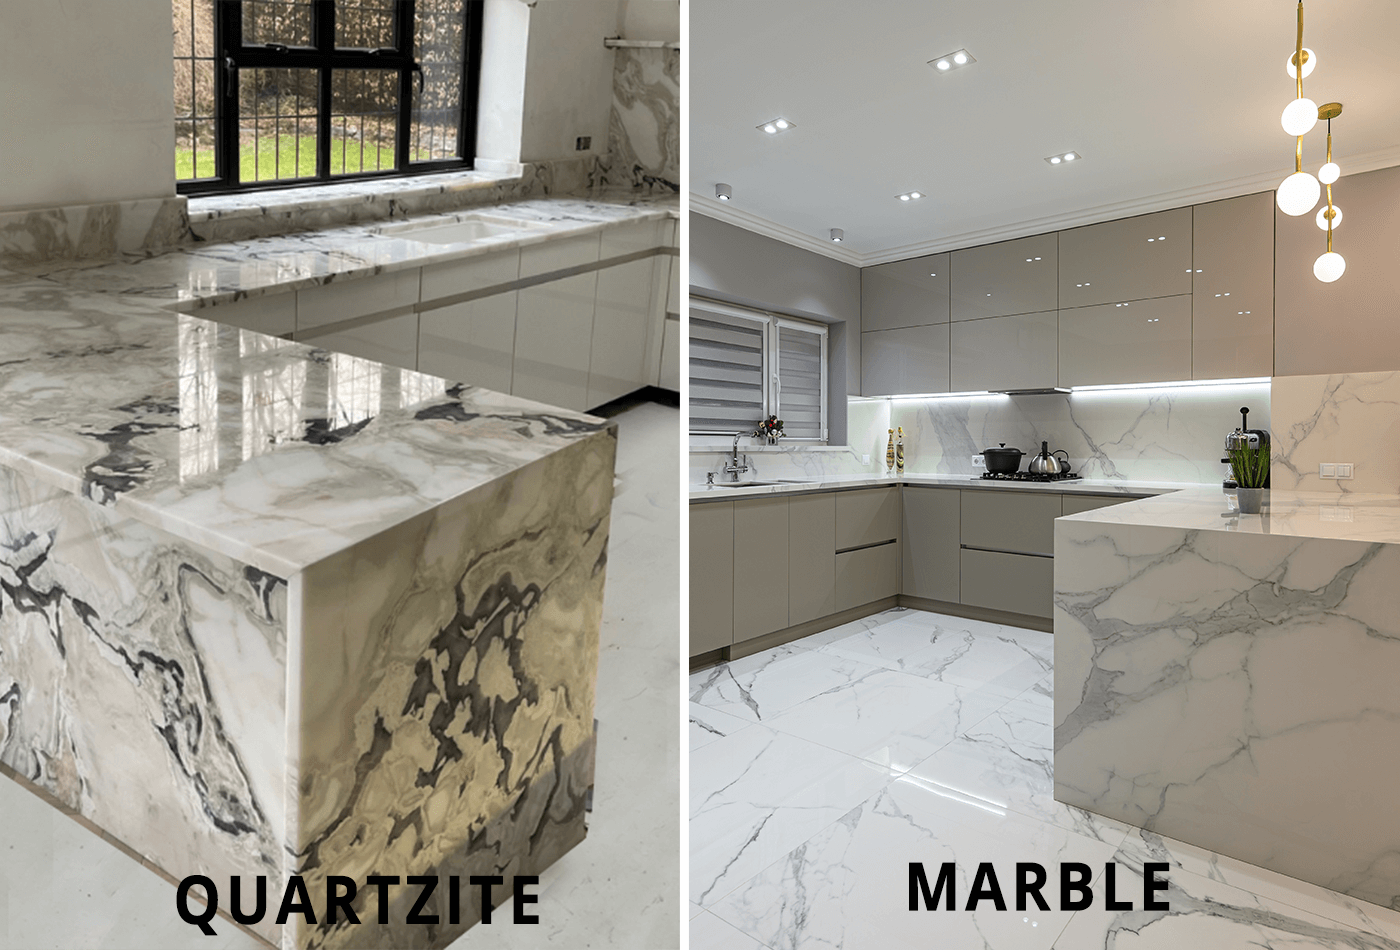 Tell the Difference Between Marble and Quartzite